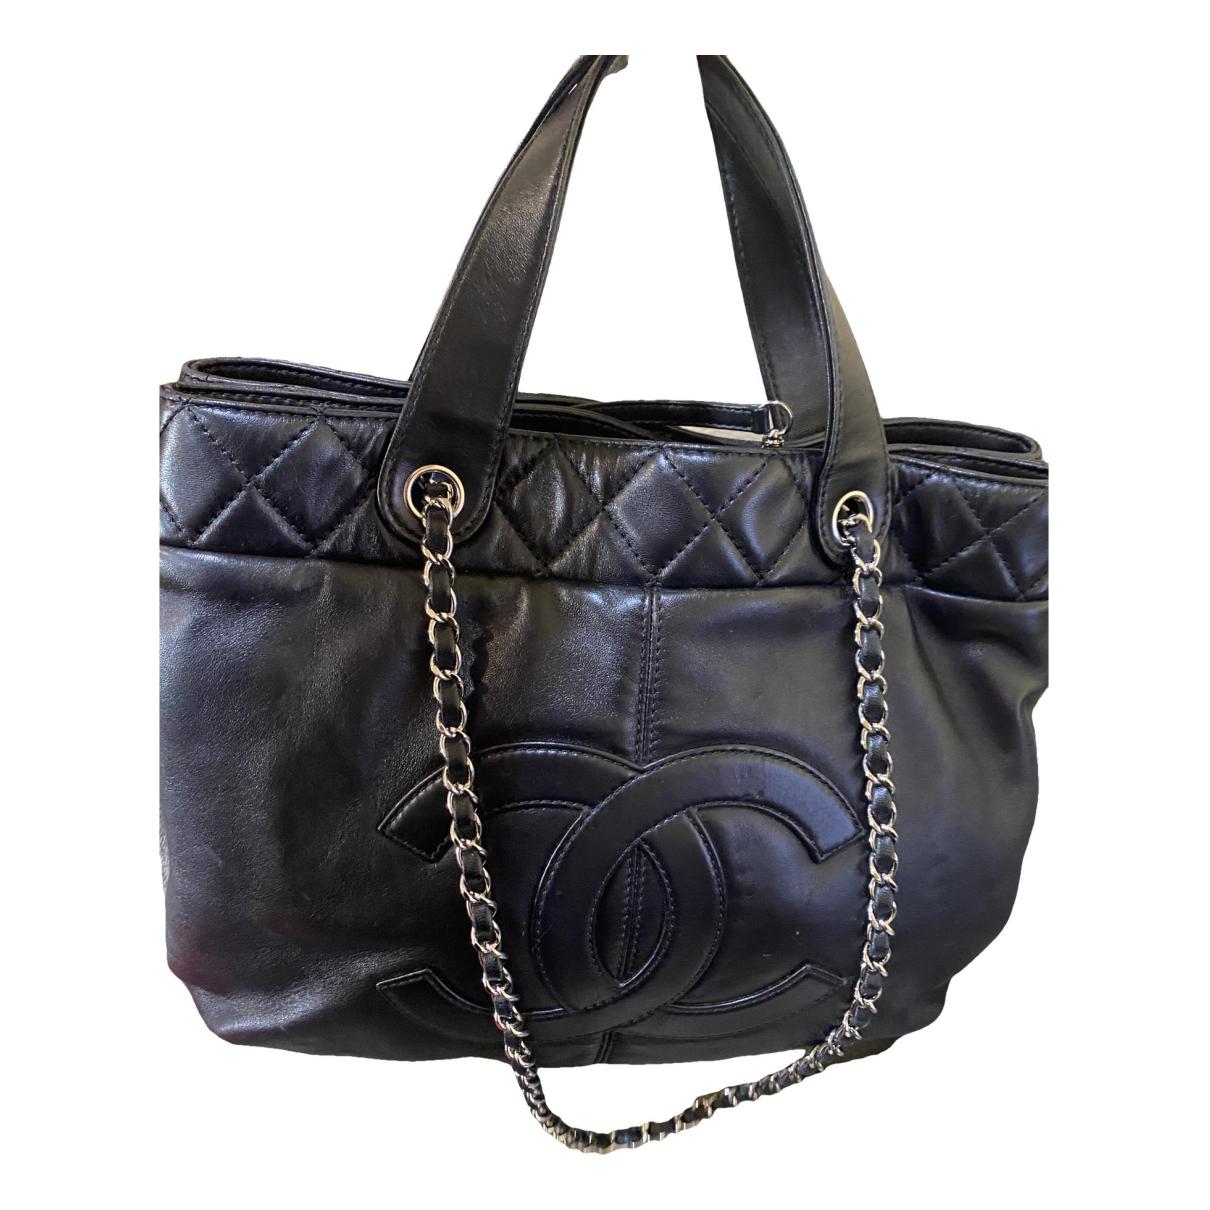 Timeless/classique leather handbag Chanel Grey in Leather - 32795220